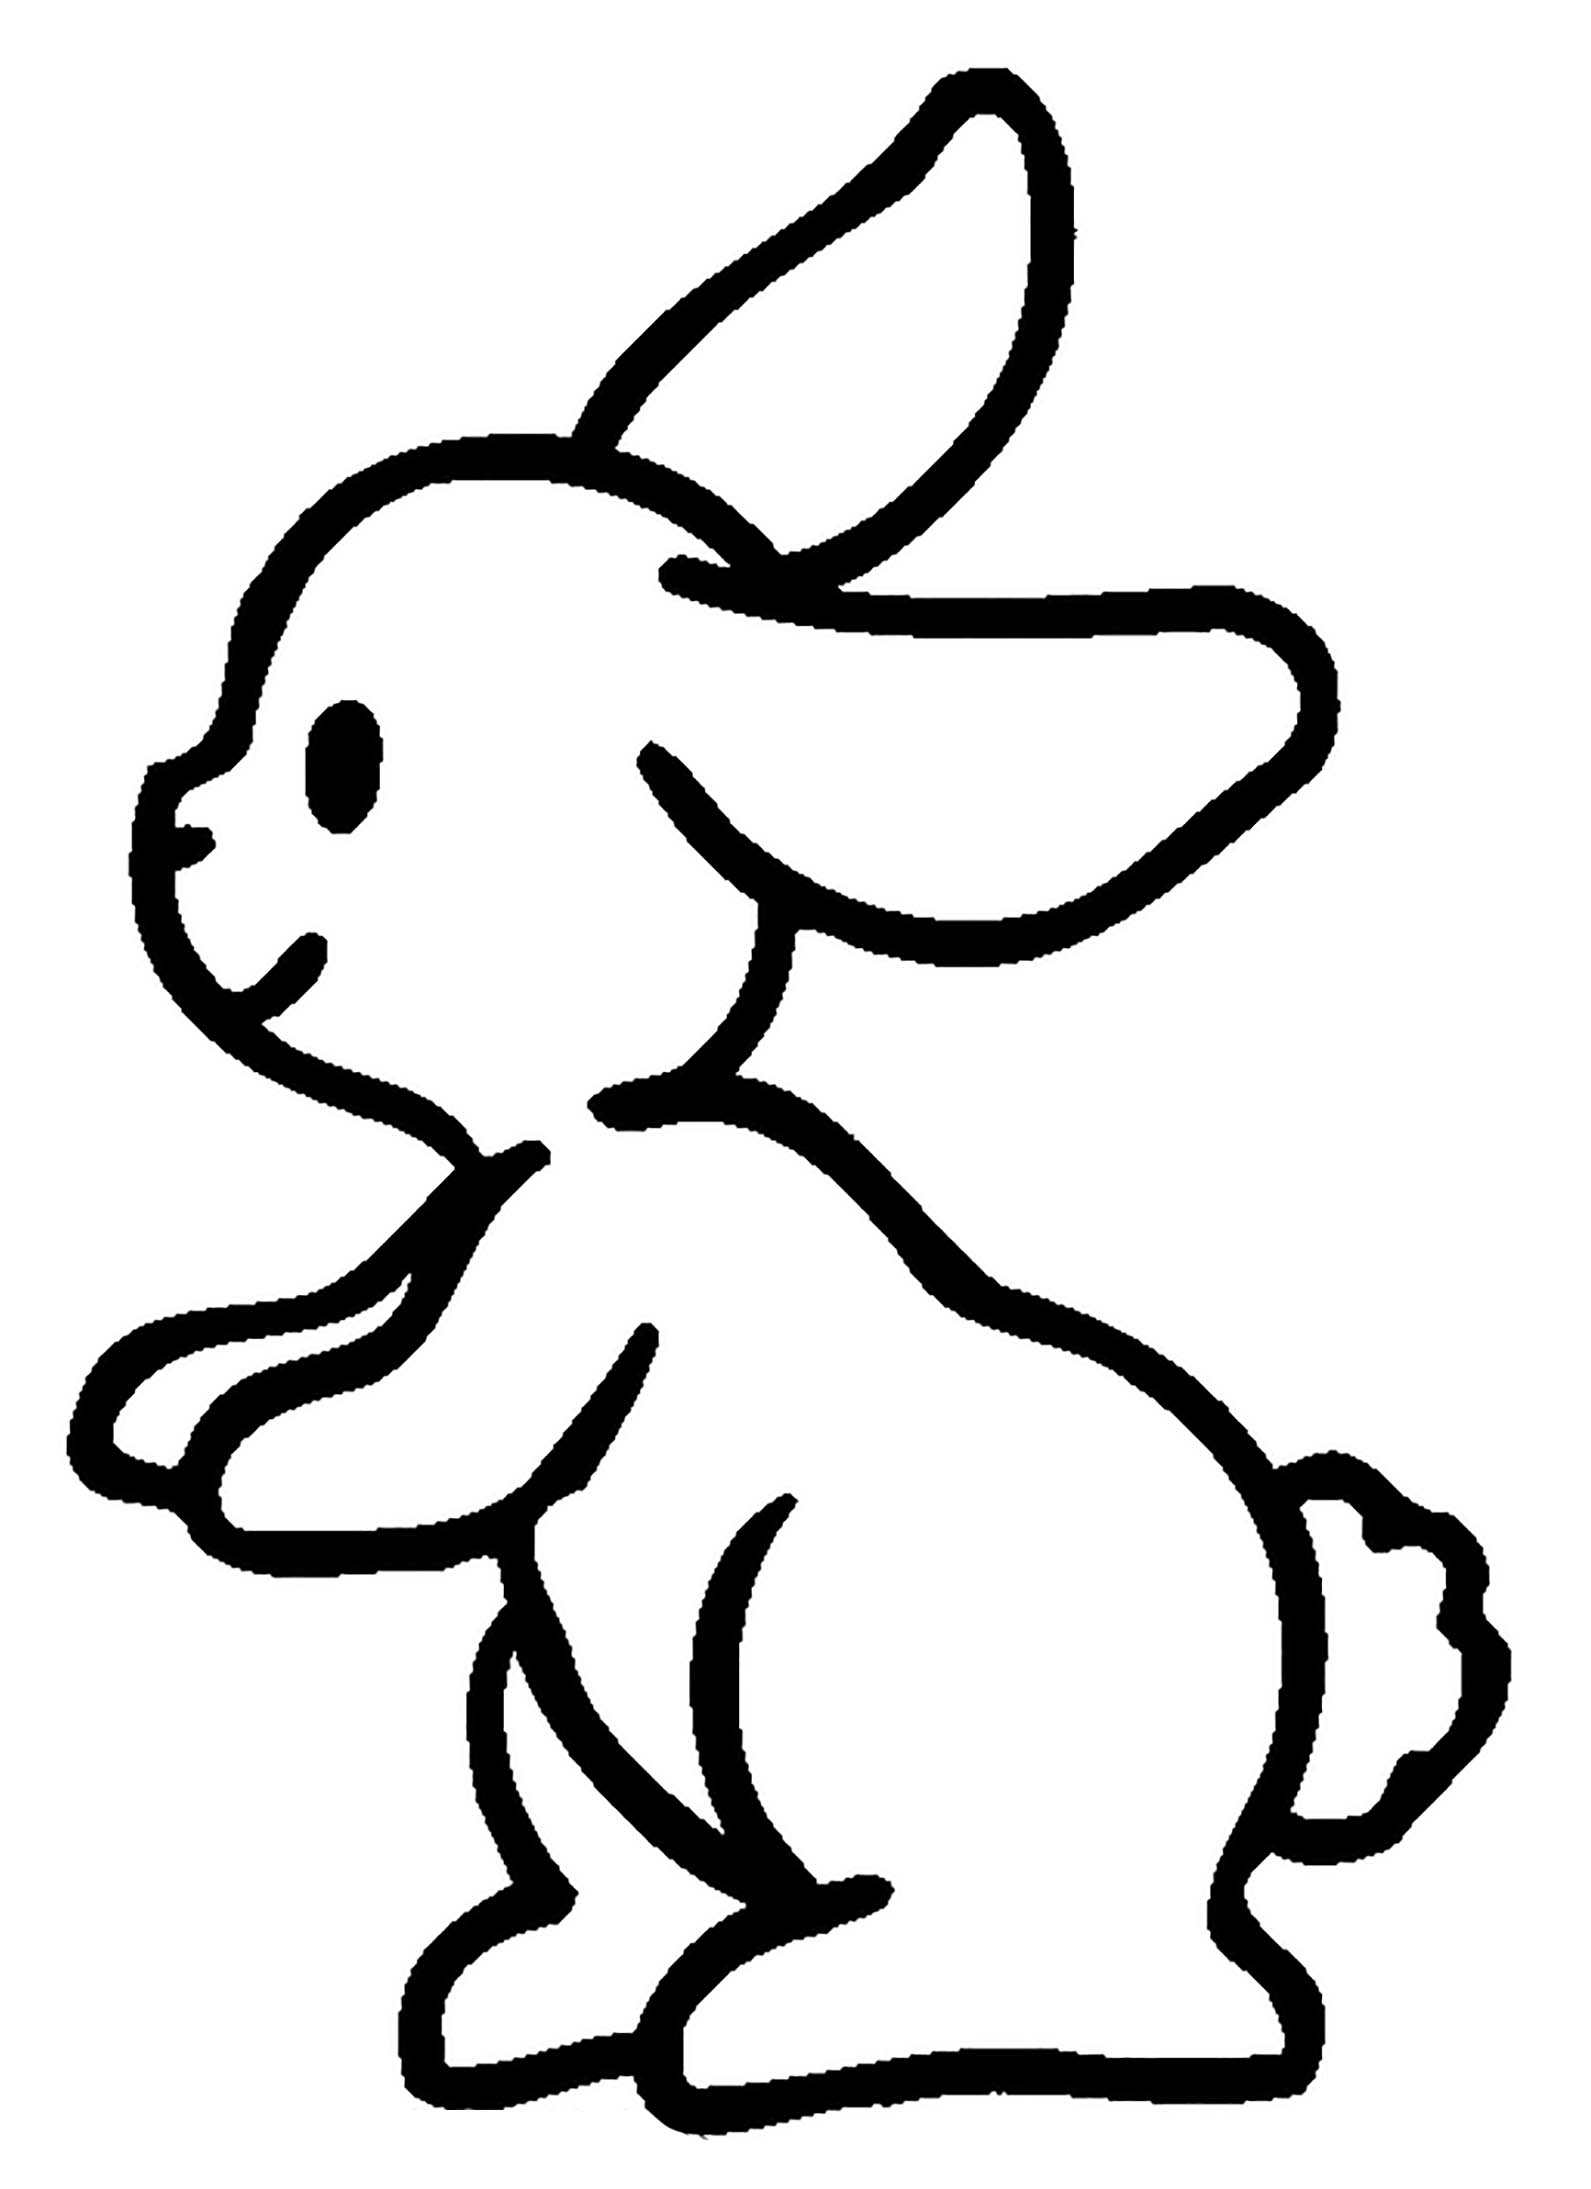 Rabbit coloring pages for kids - Rabbit Kids Coloring Pages